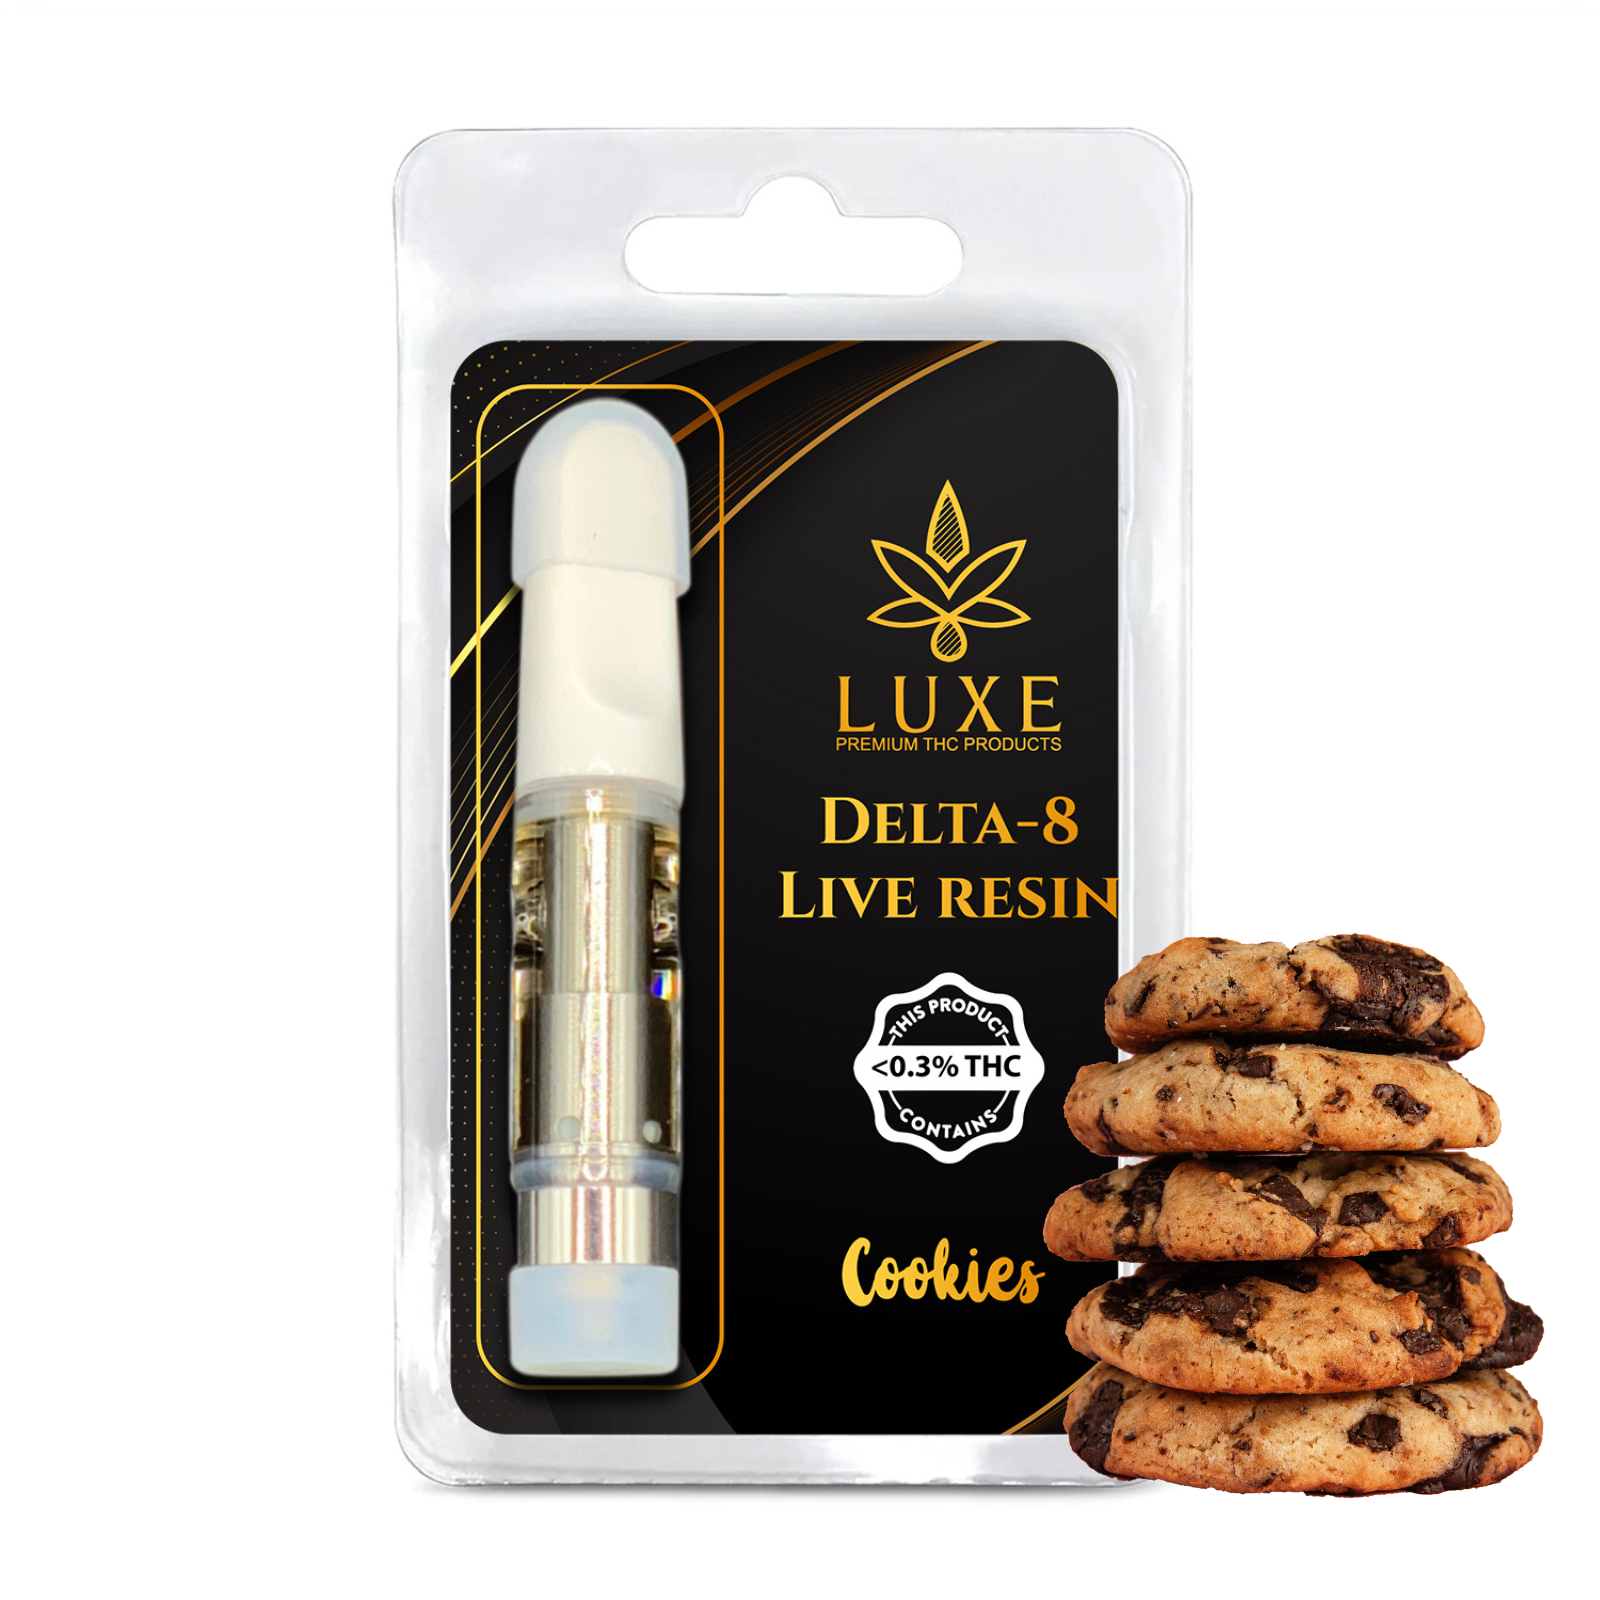 Simply Crafted Free Shipping Save 25 With Code Leafly Cookies Live Resin Delta 8 Thc Vape 8589